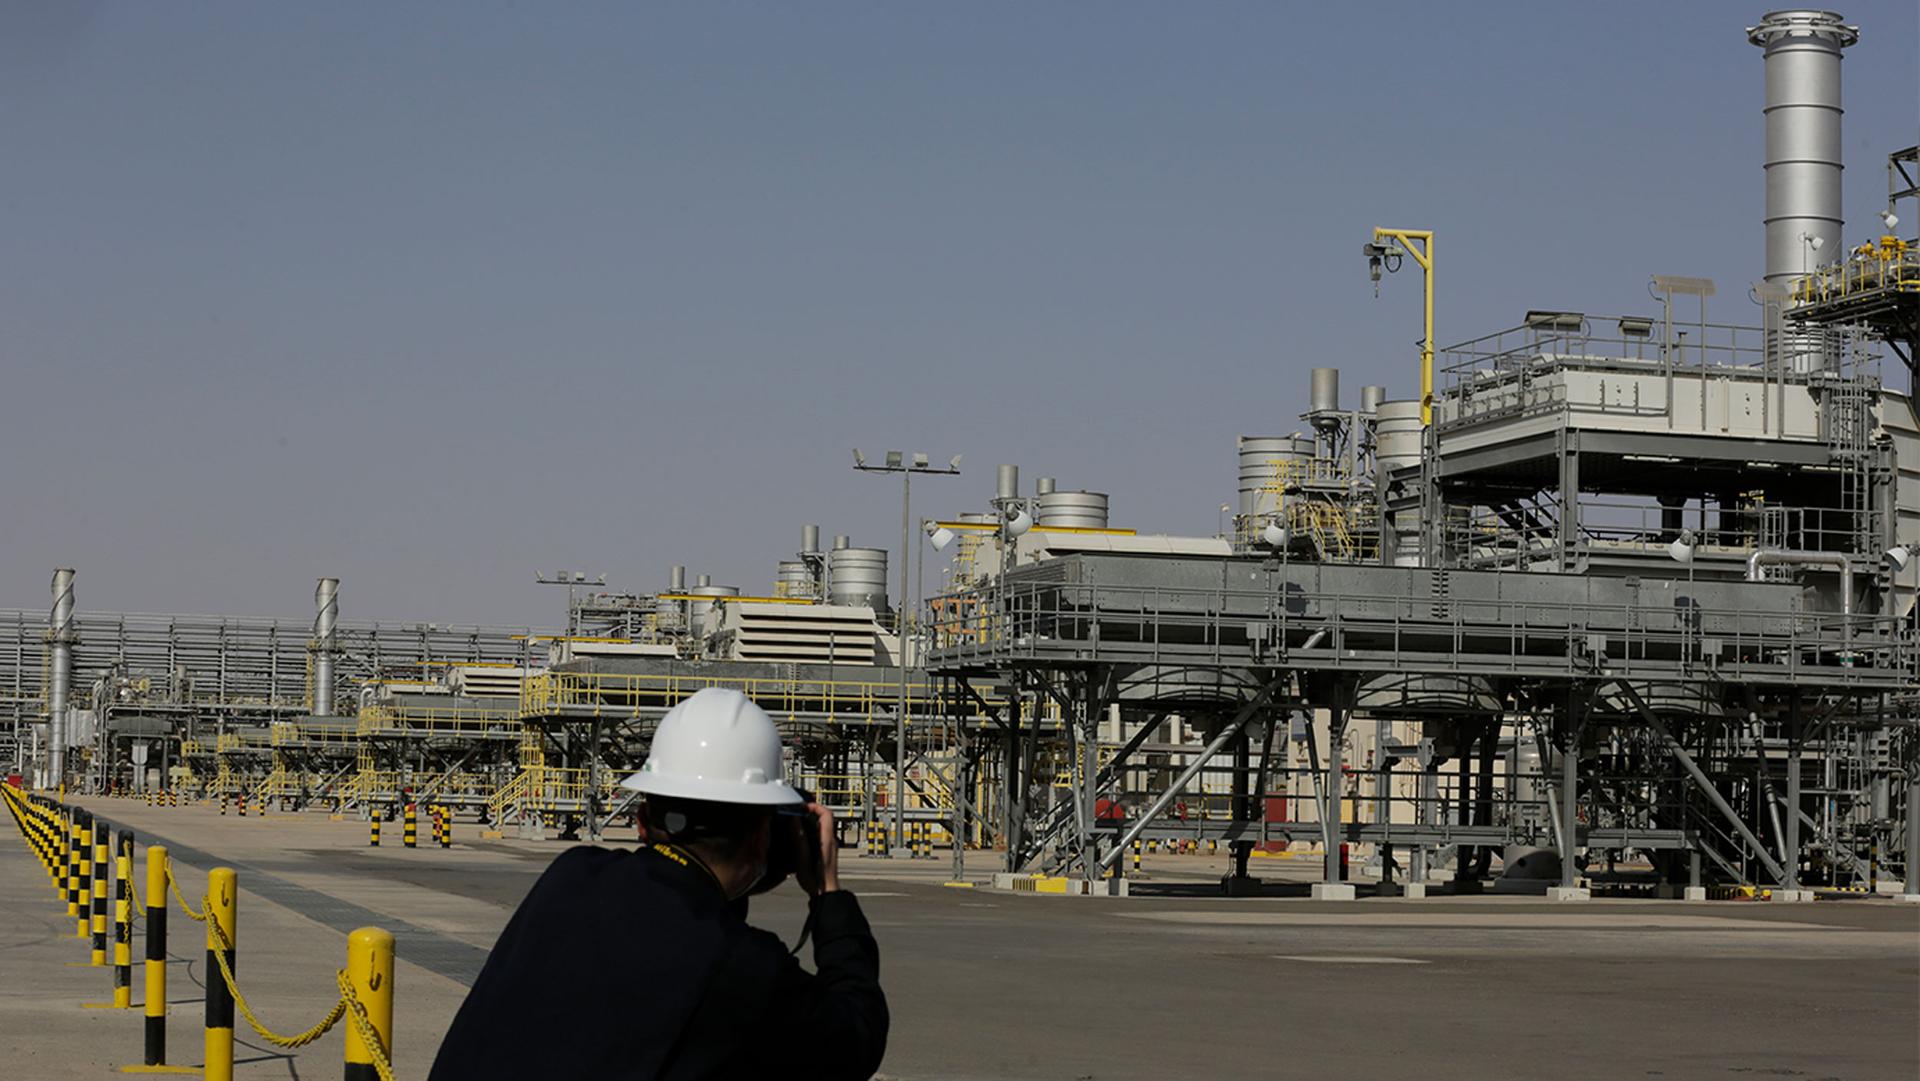 A photographer takes pictures of the Khurais oil field during a tour for journalists, 150 km east-northeast of Riyadh, Saudi Arabia